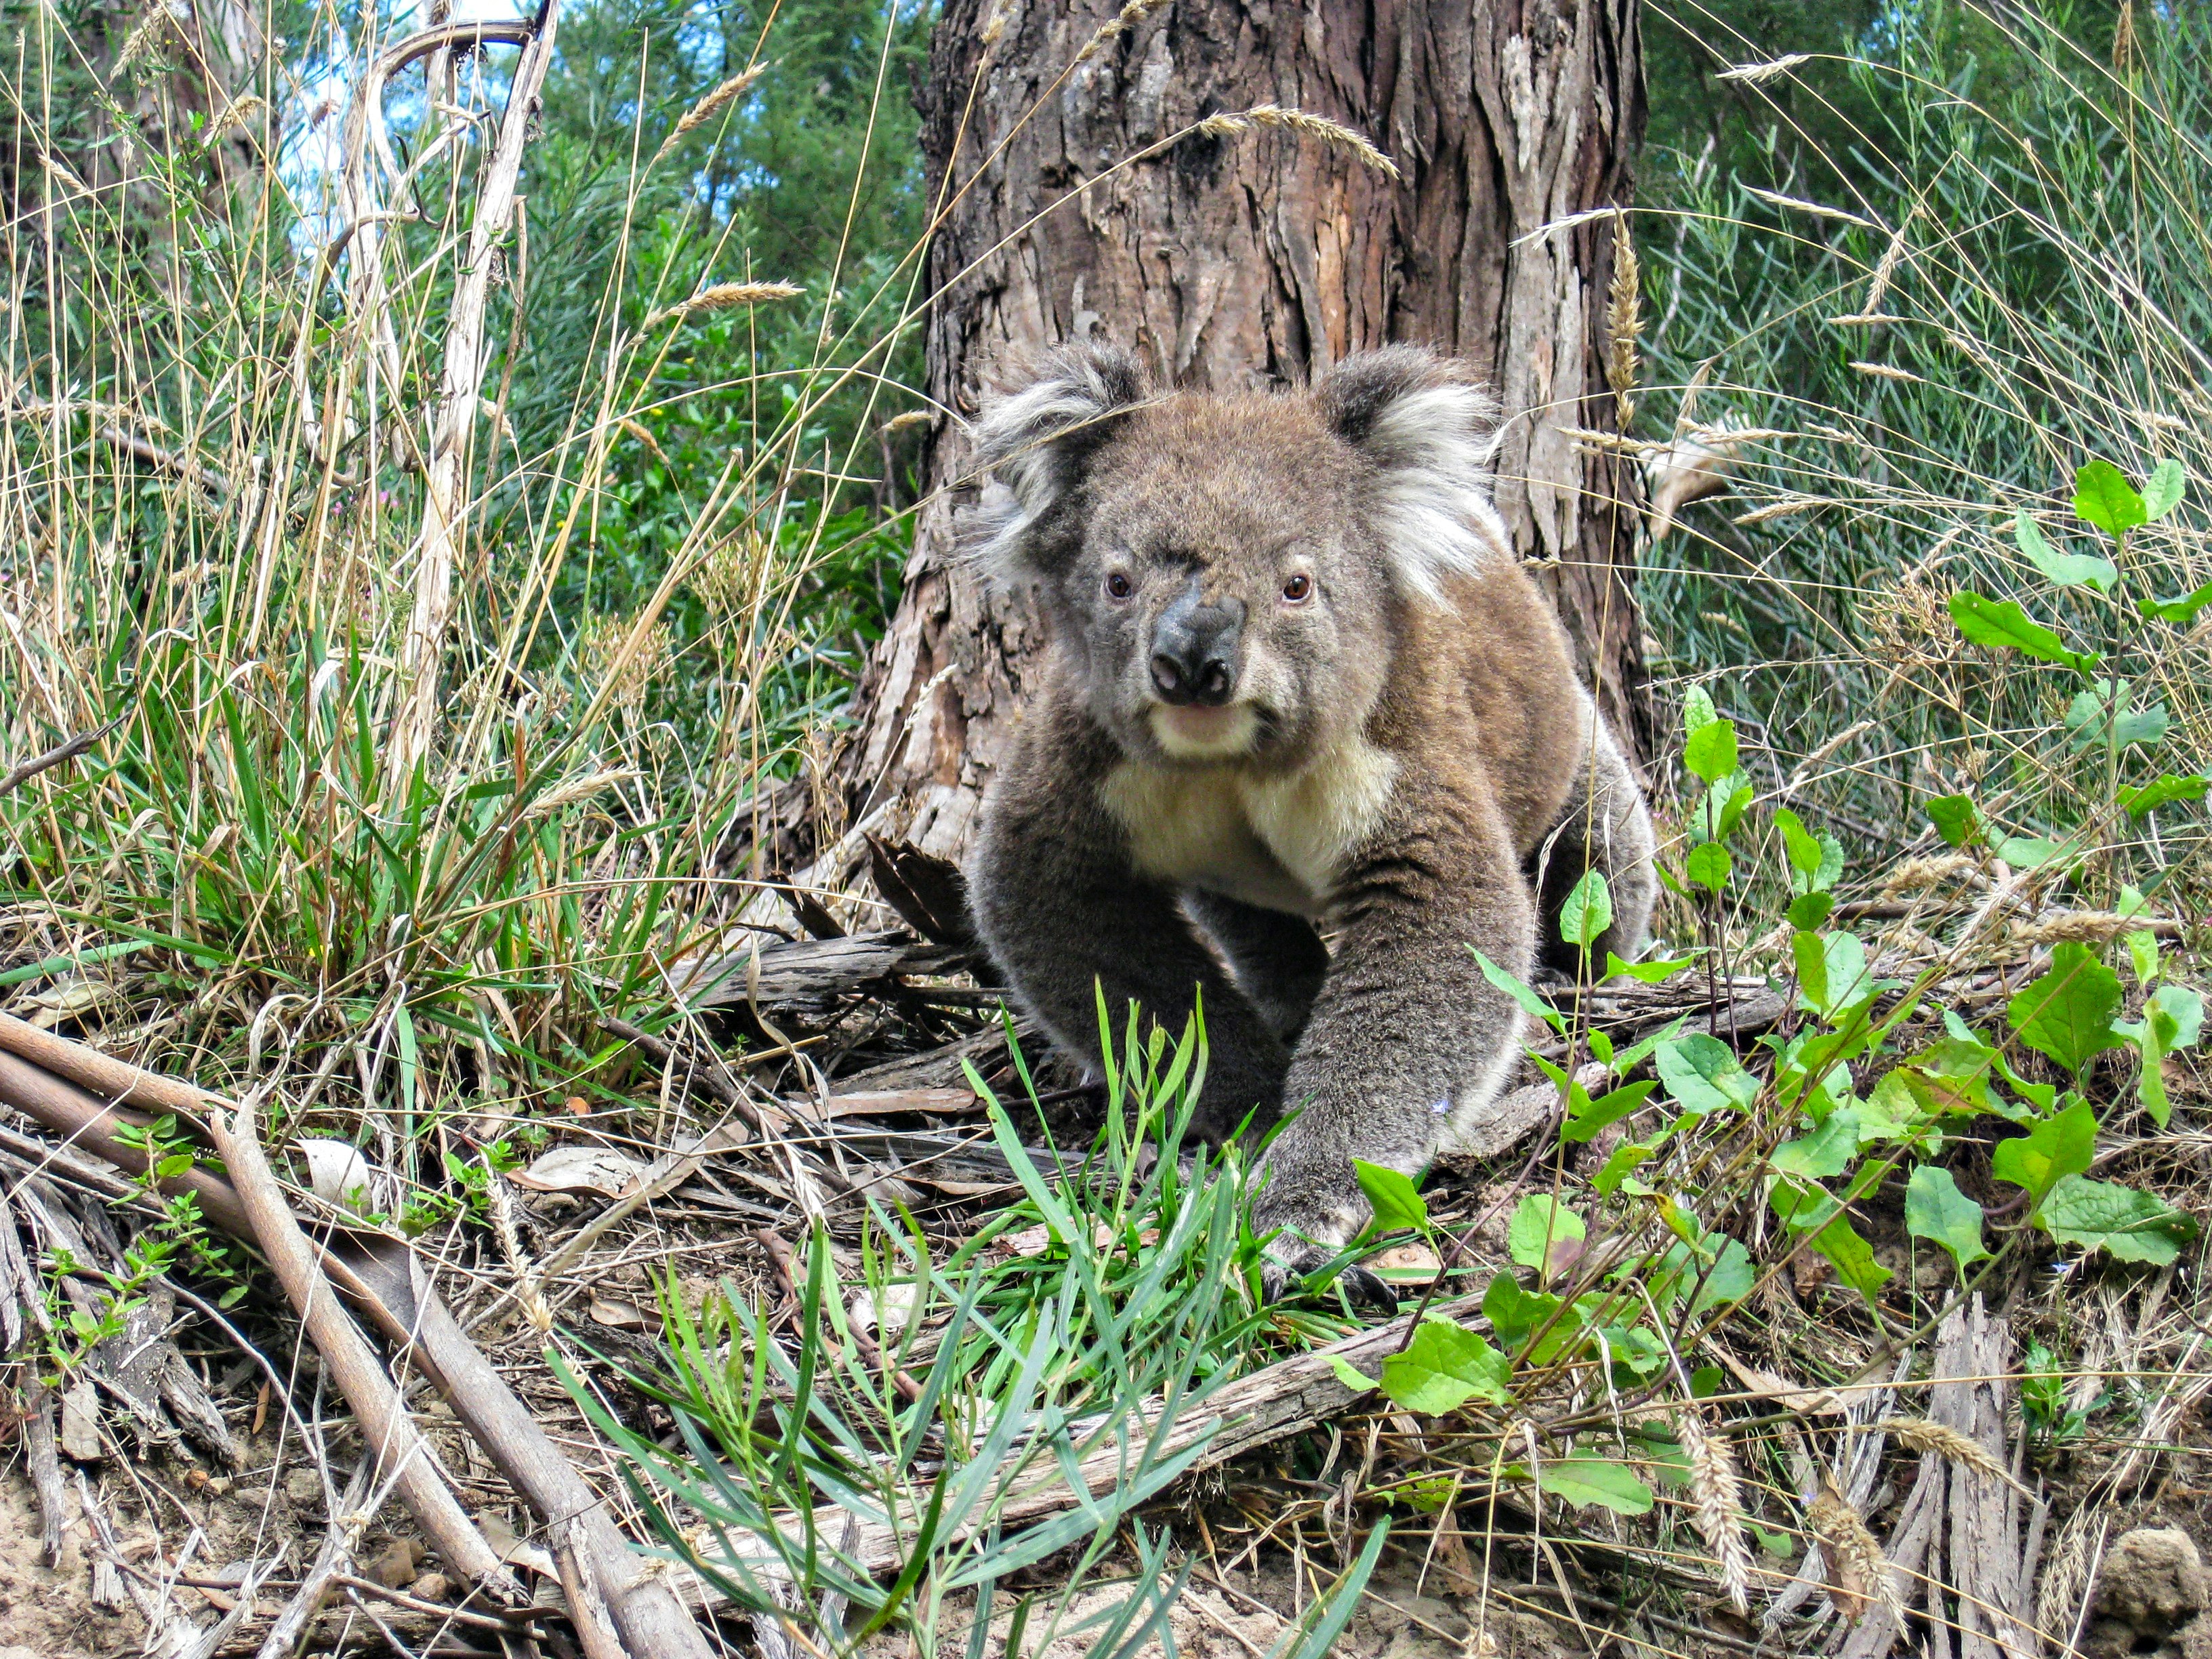 A wild koala walking and looking at the camera in South Australia